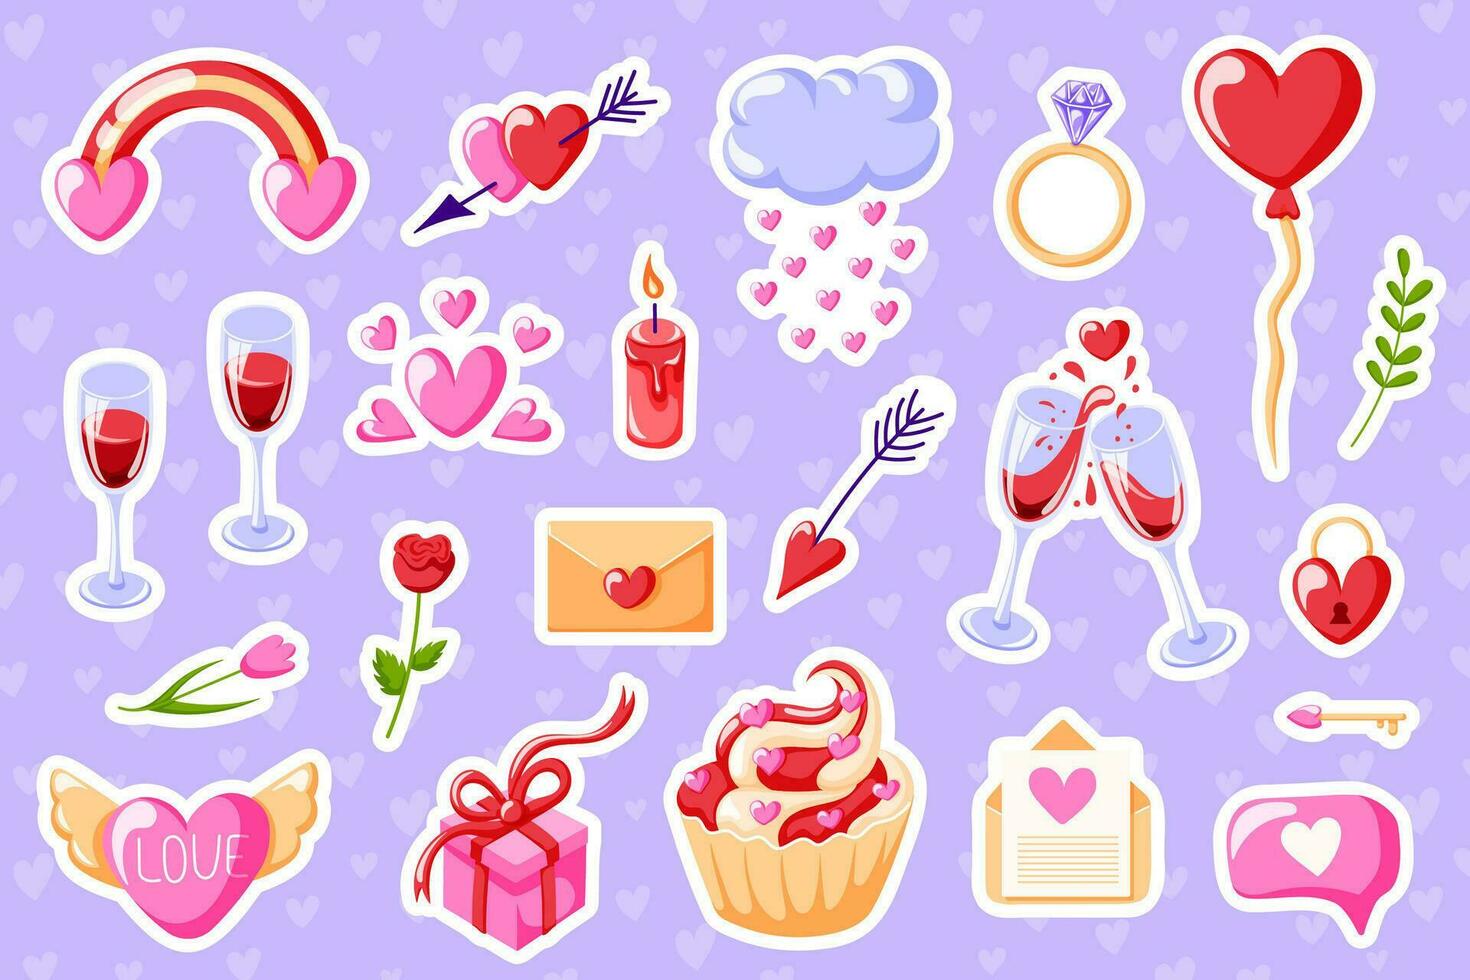 Sticker set for love Valentines Day in cartoon style. Flowers, hearts, wine. Vector illustration isolated on a violet background.